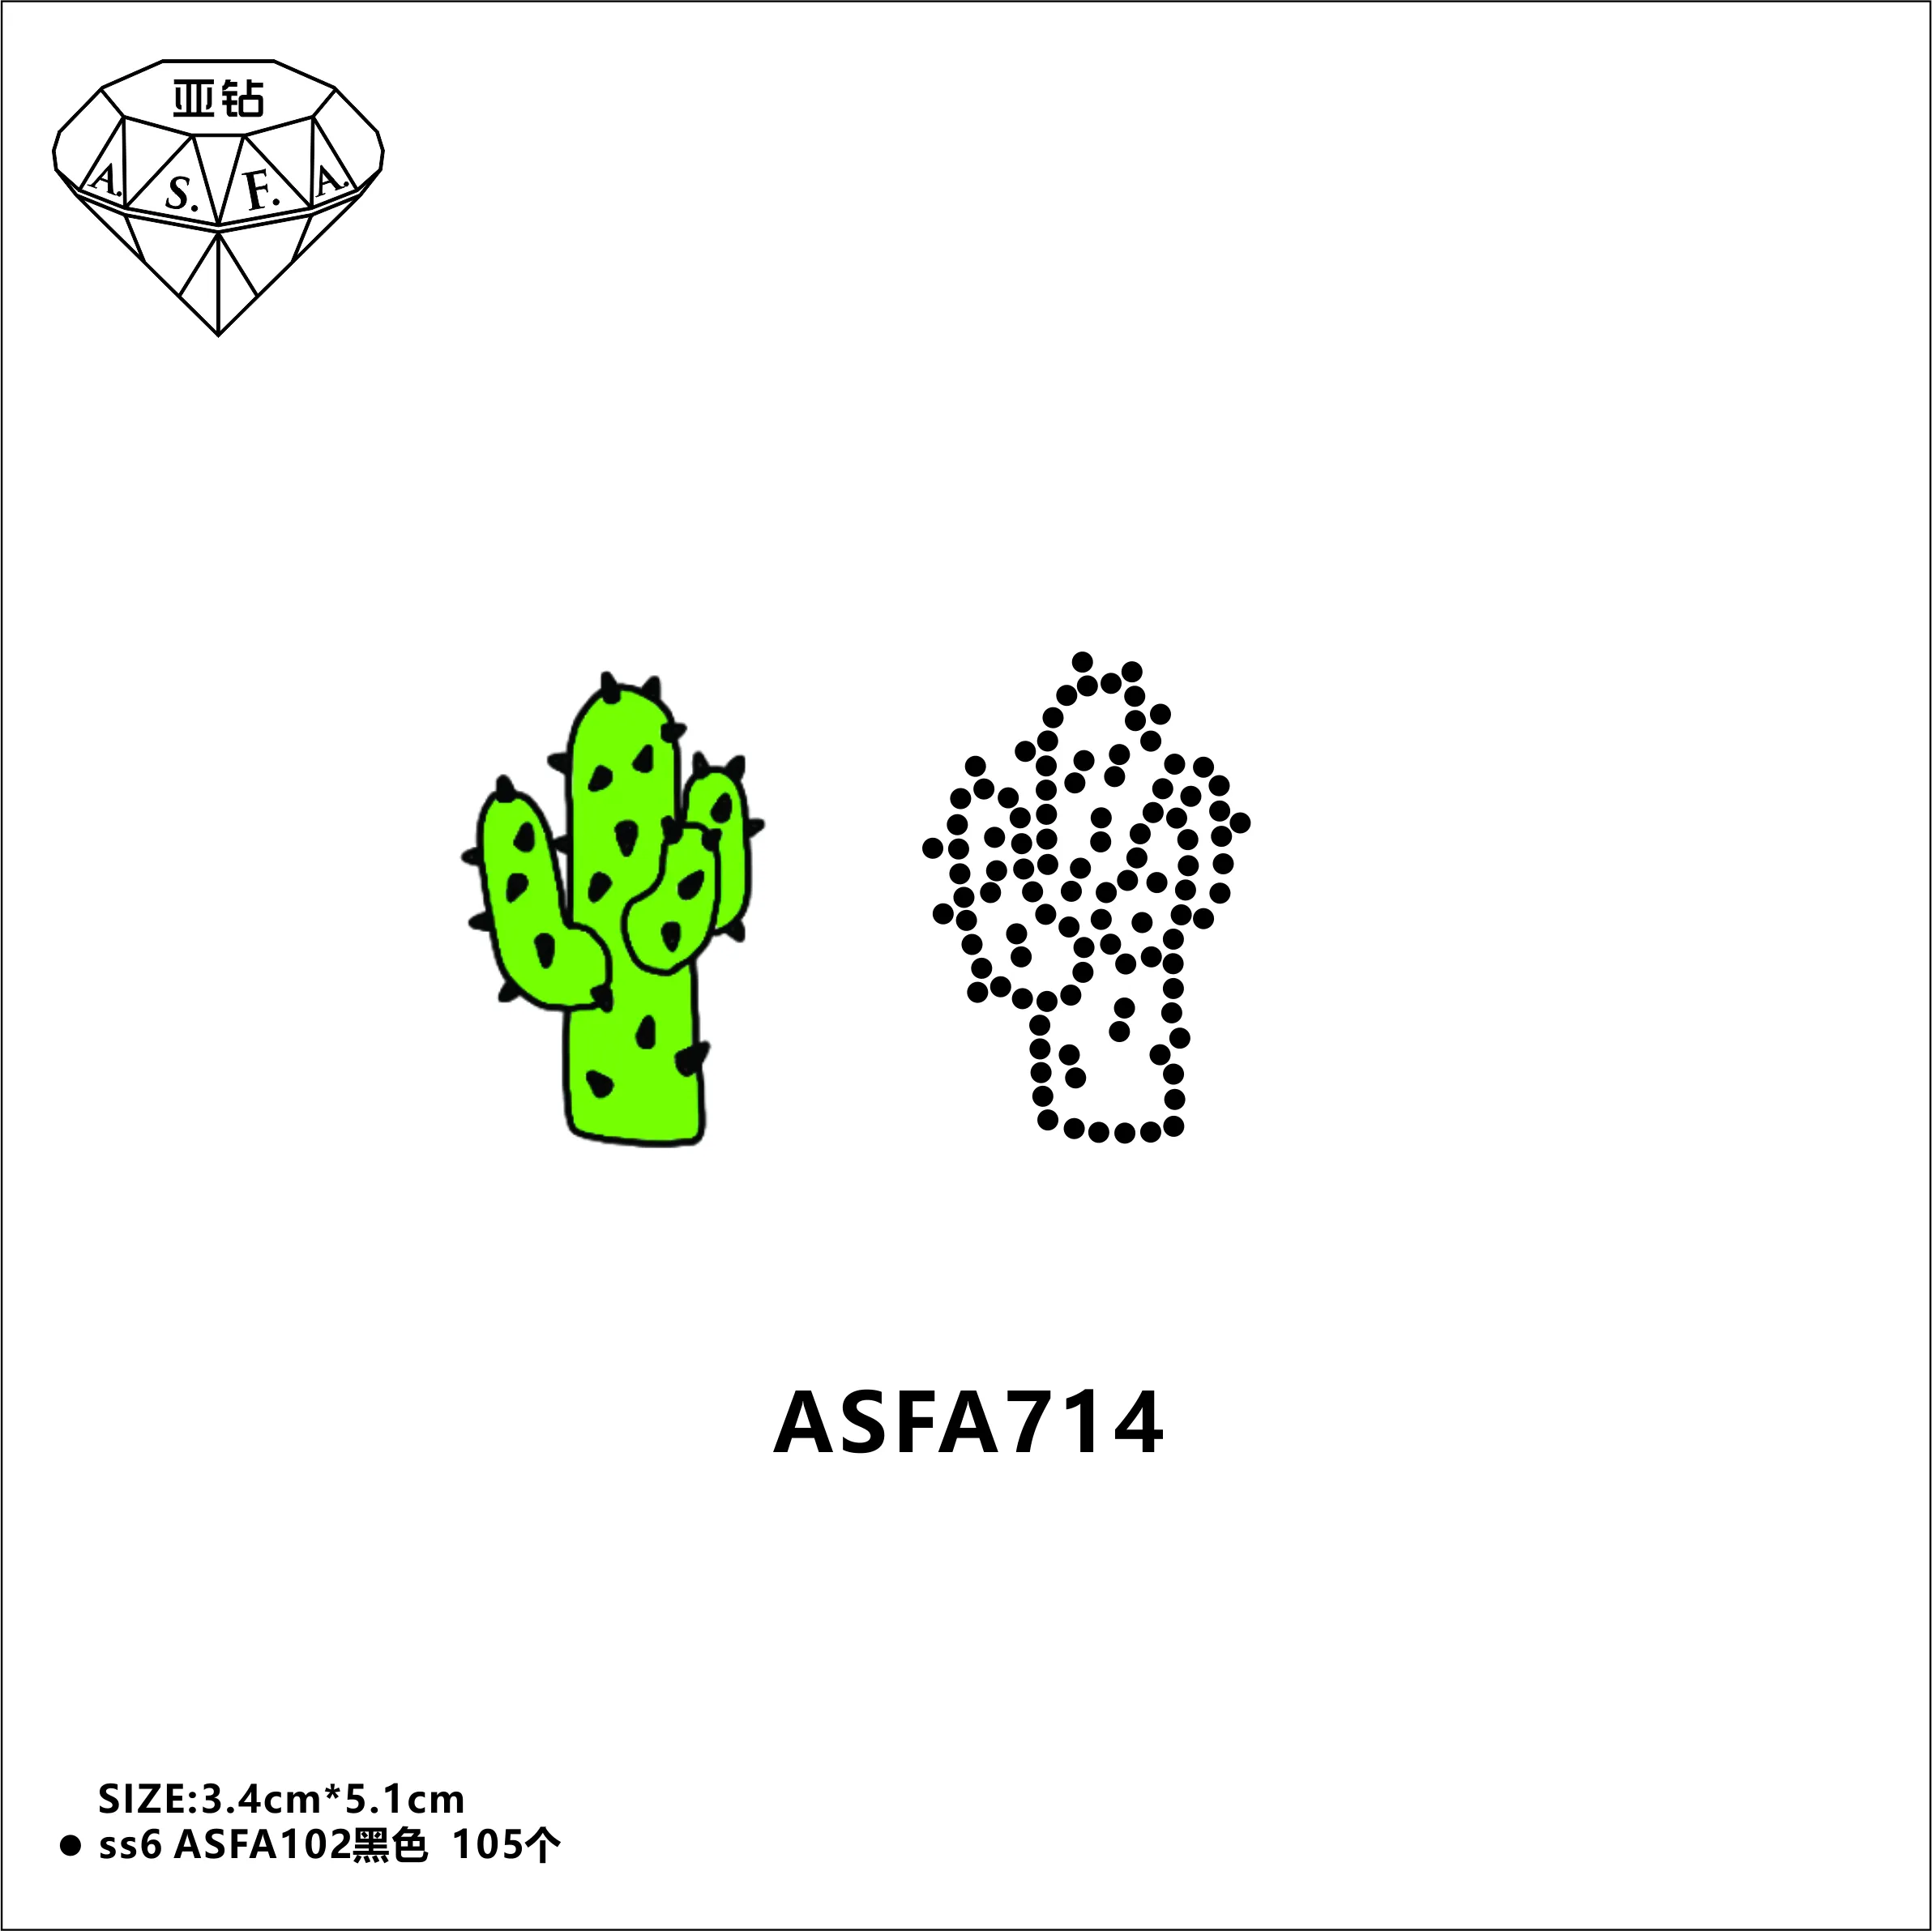 ASFA714 Hot Fix Rhinestone Cactus and Beautiful Pattern Heat Transfer for DIY Applique on T-Shirts Caps Shoes Bags